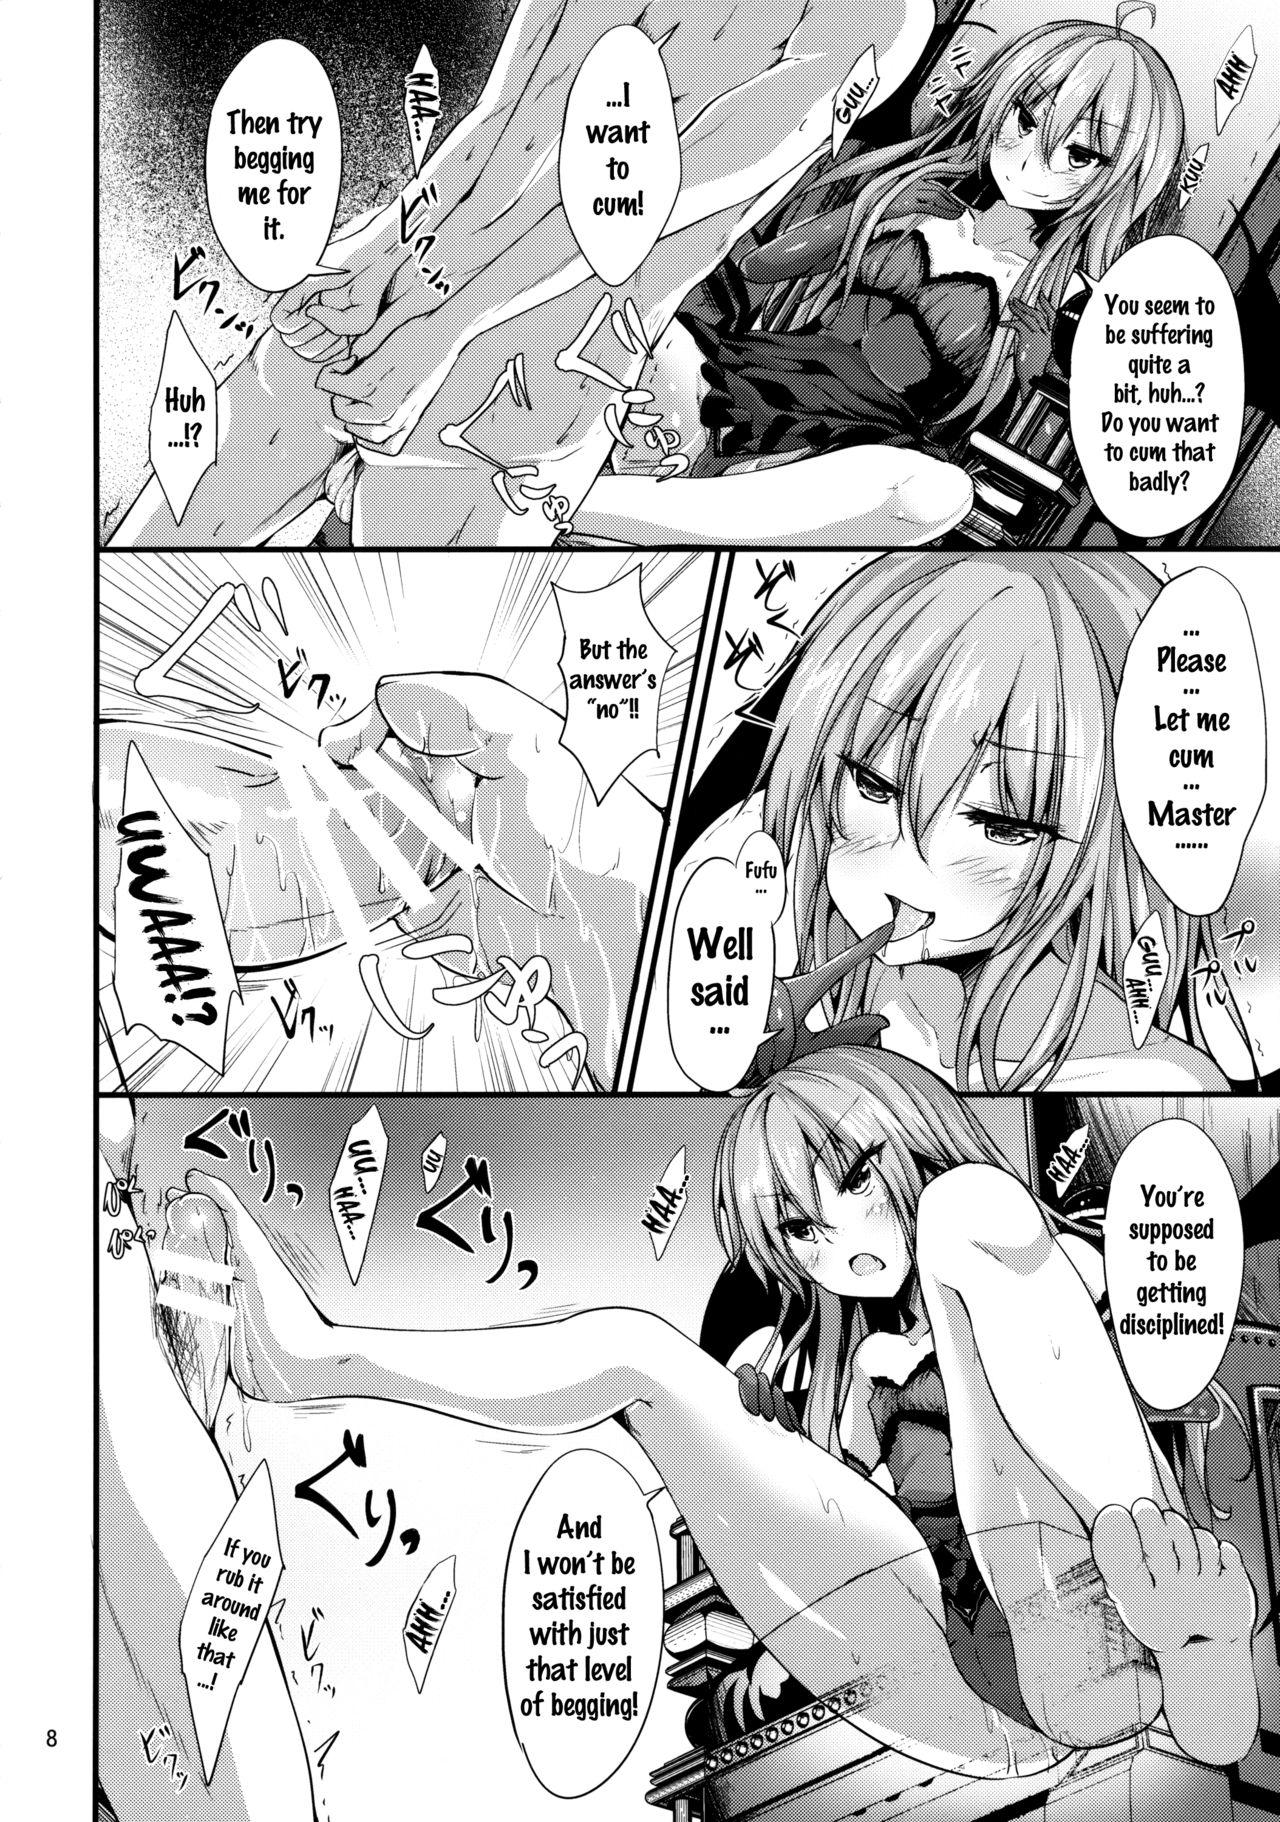 Boys Remi no Motto Otona ni Narumon! | Remi's Becoming More of An Adult! - Touhou project Gay Party - Page 7